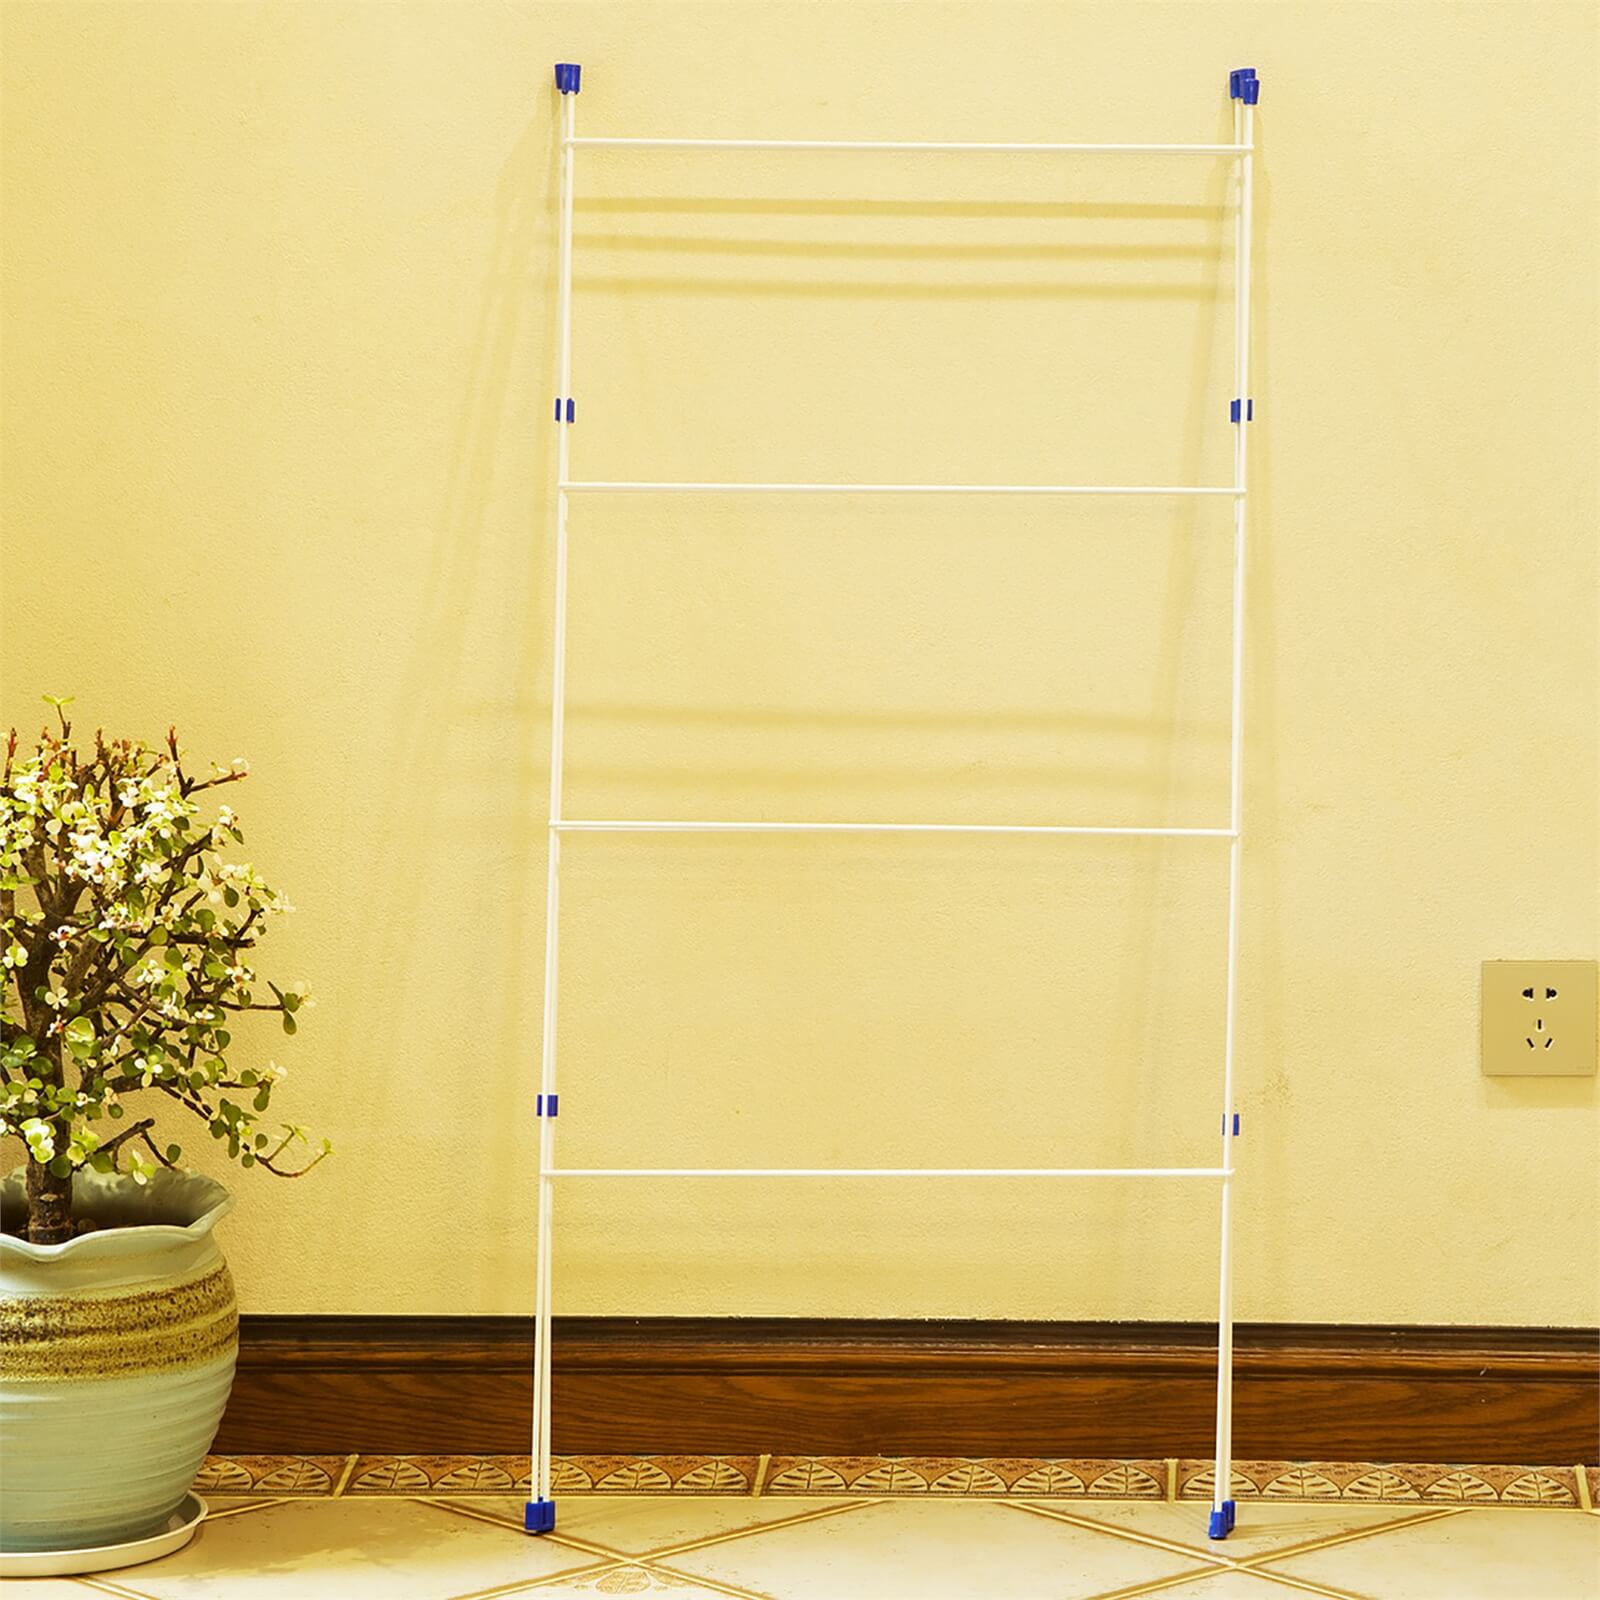 3 Sided Gate Airer